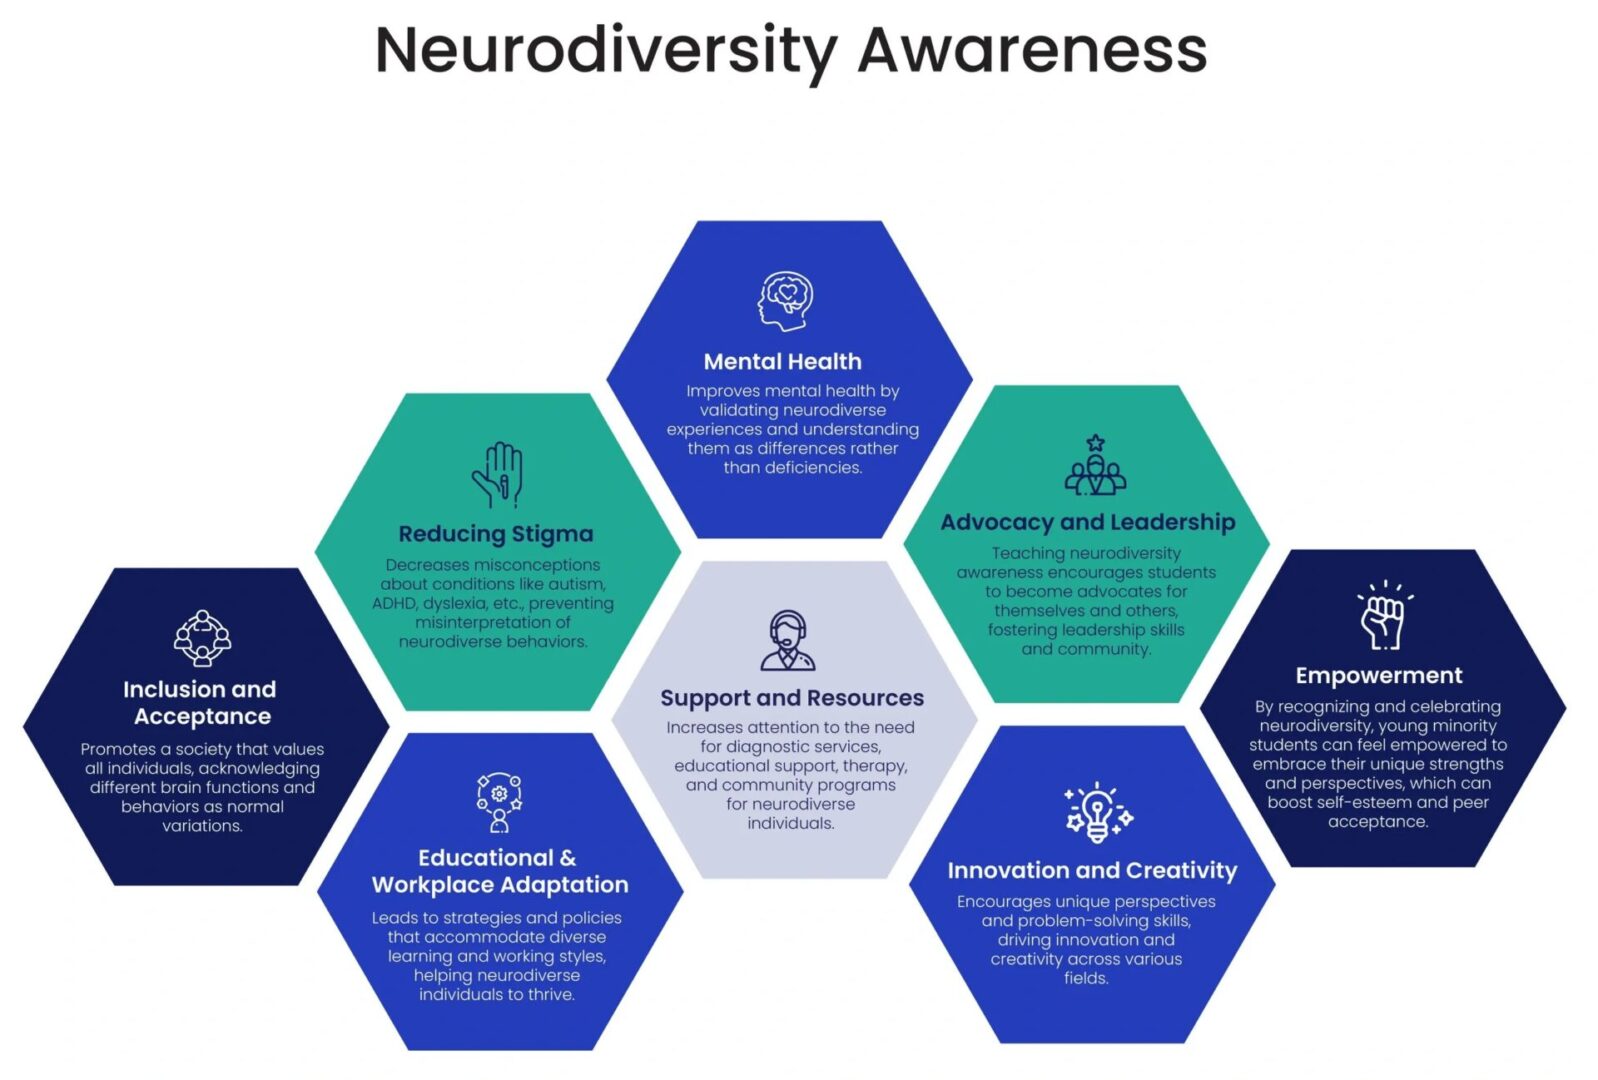 A graphic of the neurodiversity awareness process.